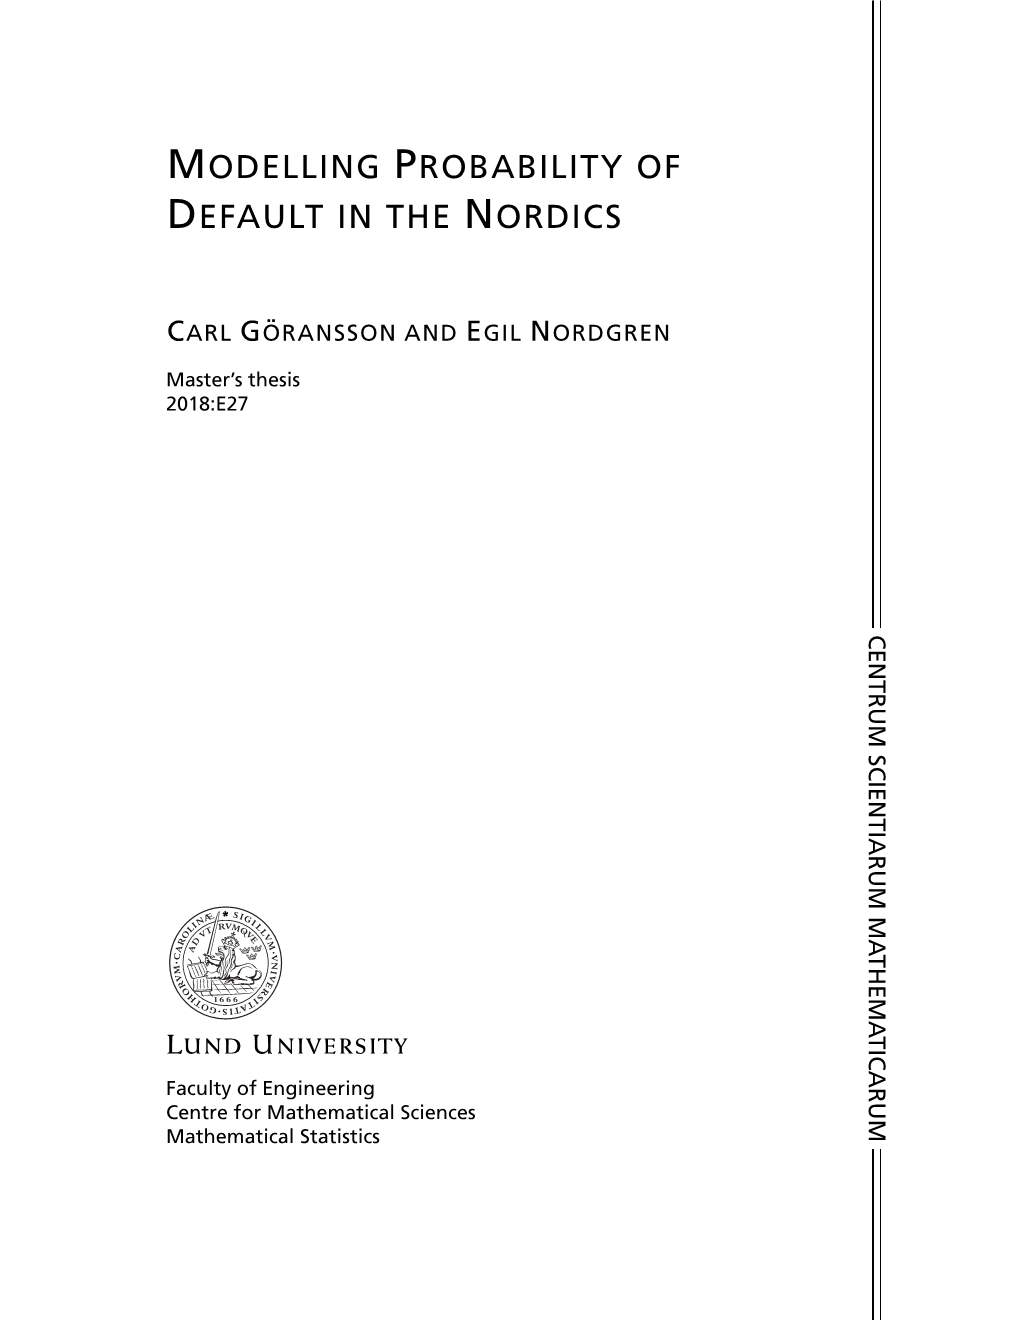 Modelling Probability of Default in the Nordics